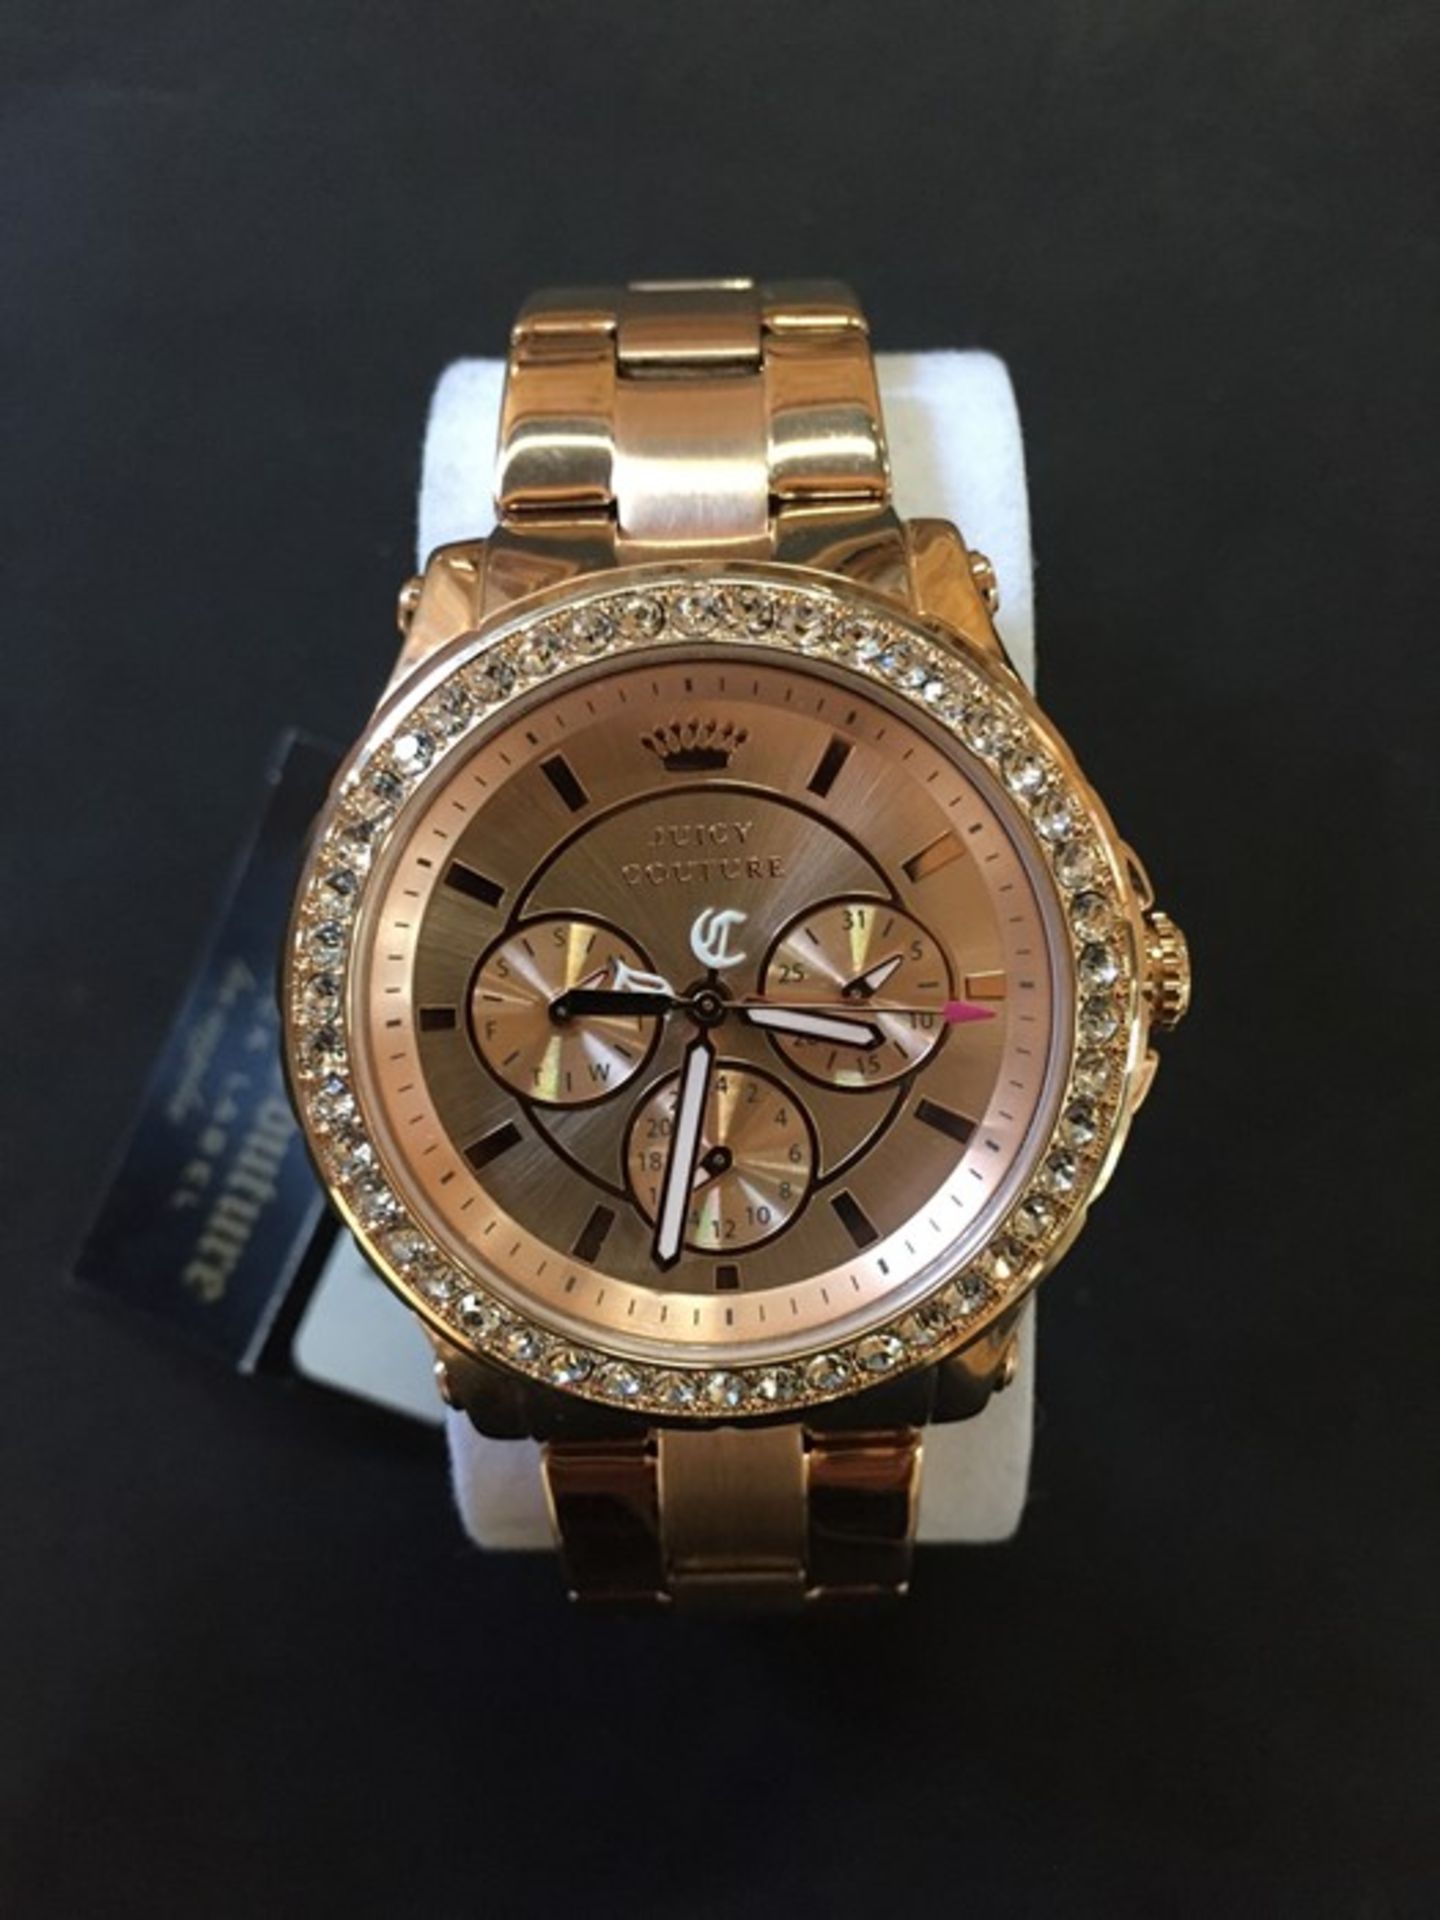 1 UNBOXED LADIES JUICY COUTURE PEDIGREE CHRONOGRAPH WATCH 1901050 IN ROSE GOLD / RRP £185.00 (